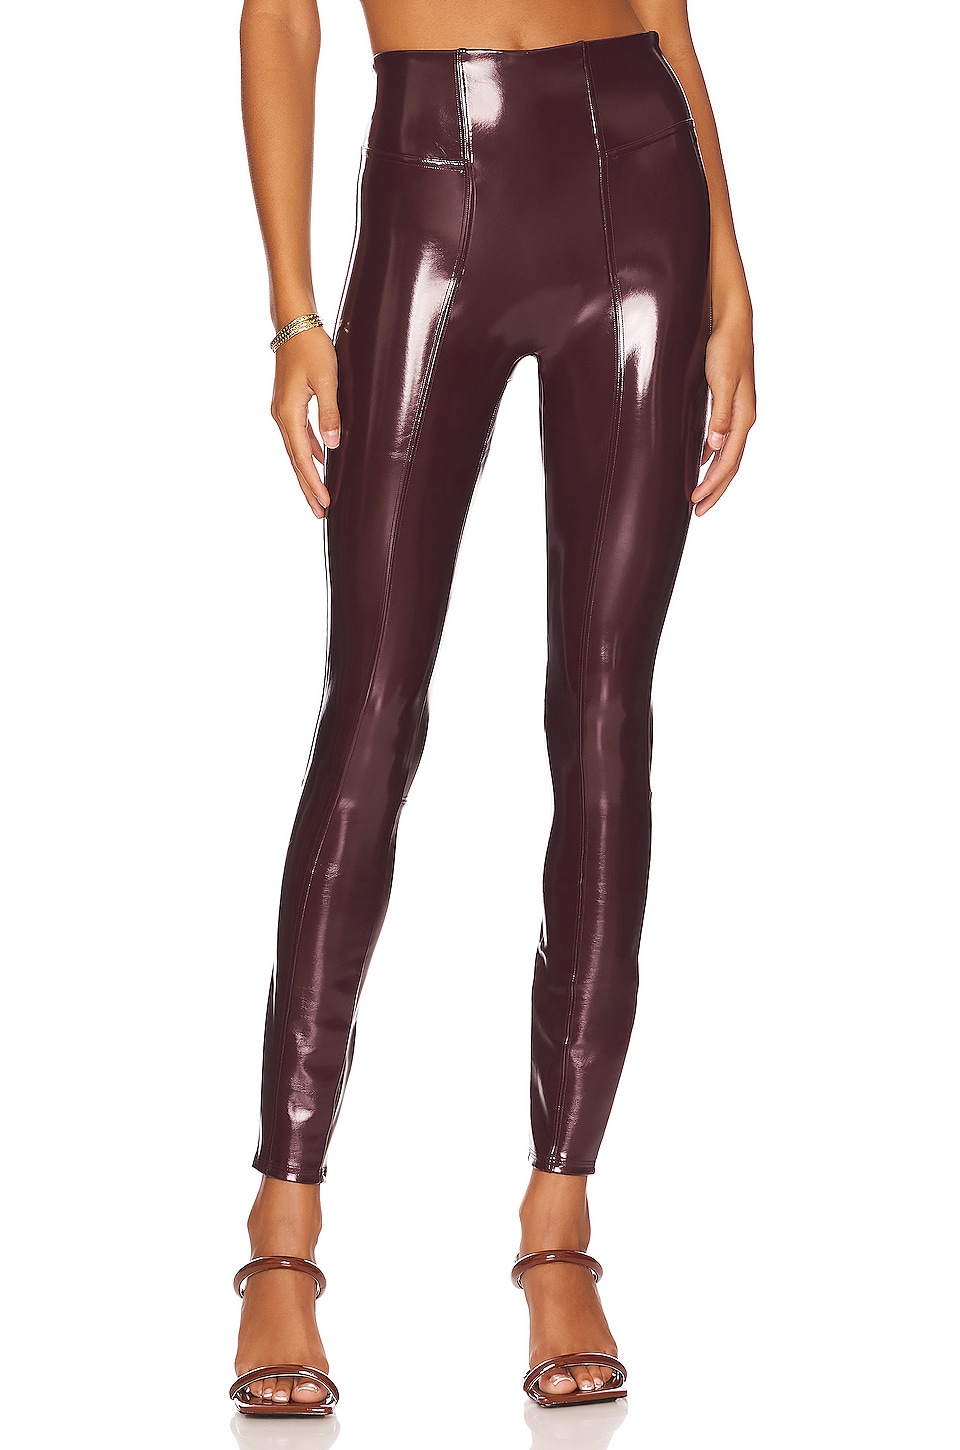 World of Leggings® Matte High Waisted Faux Leather Leggings - Made in The  USA